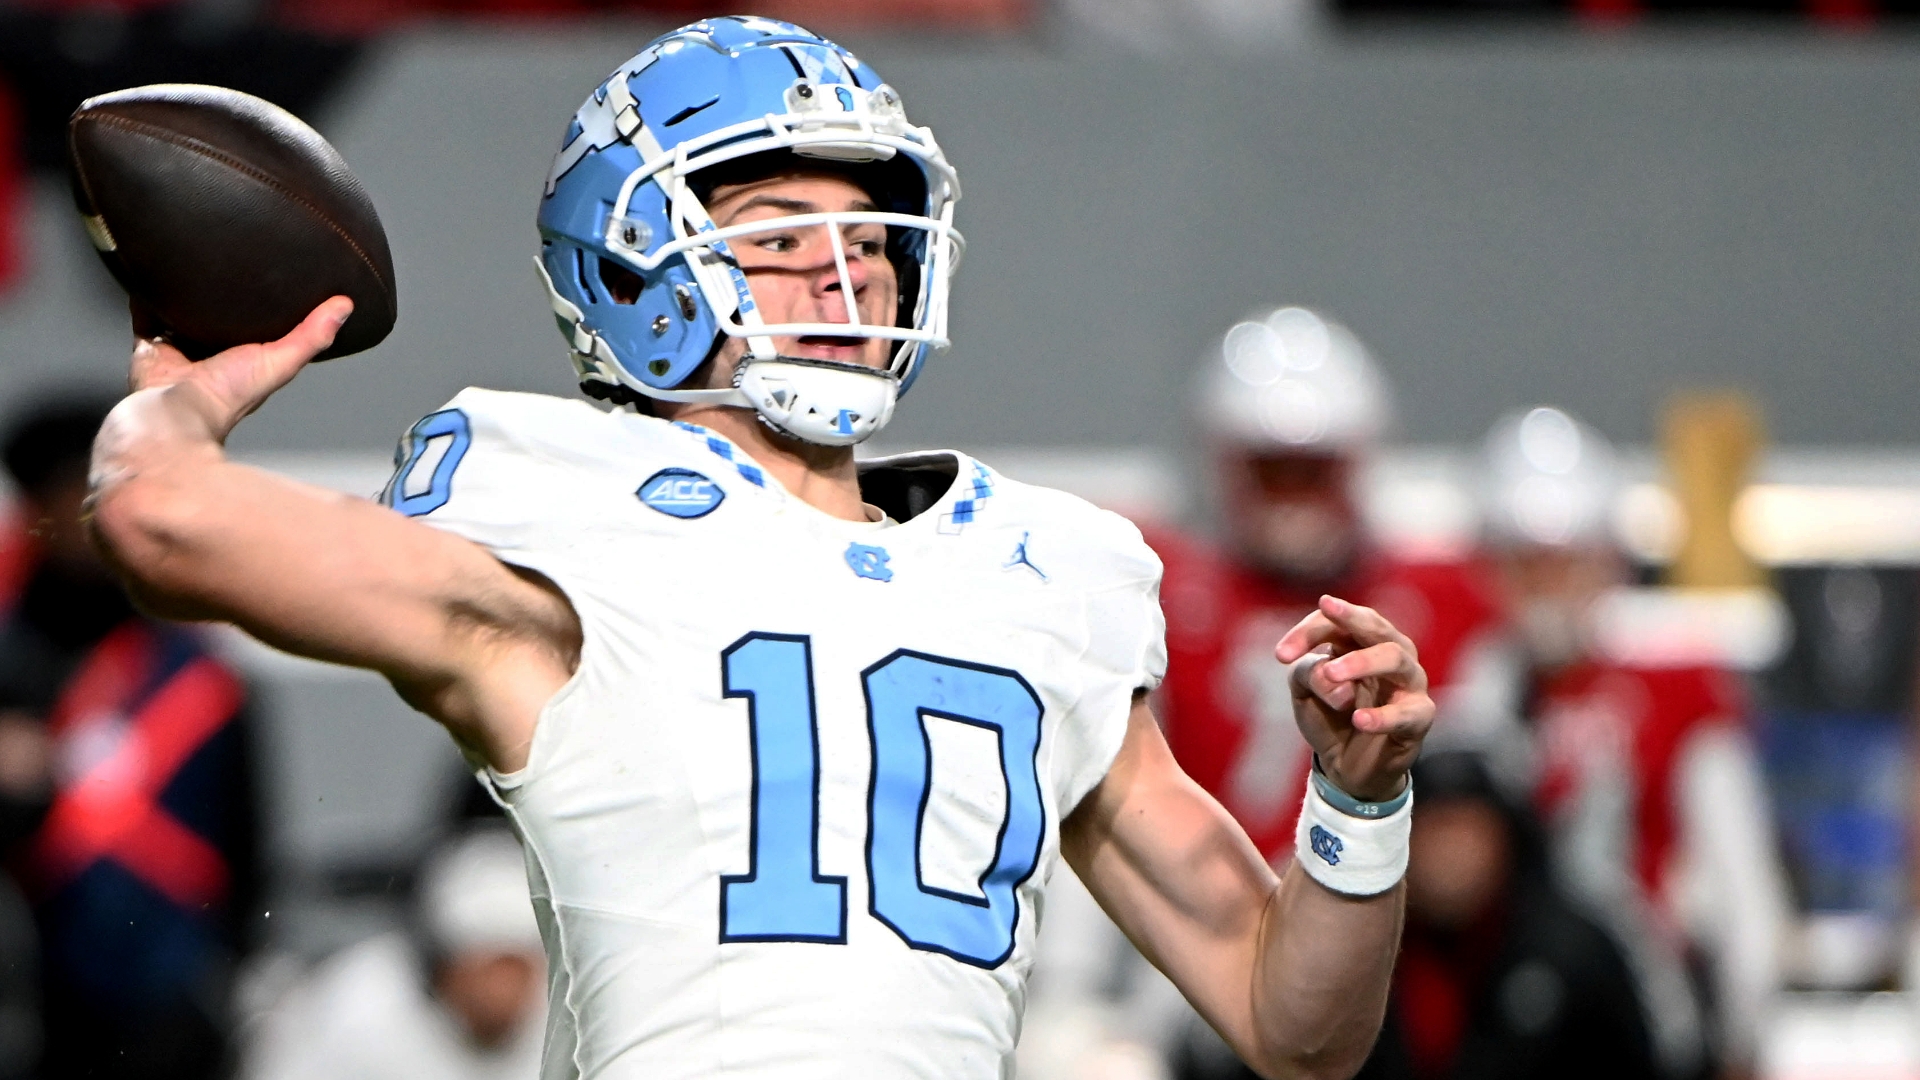  Drake Maye: A Fresh Talent with a Shot at Leading the Patriots